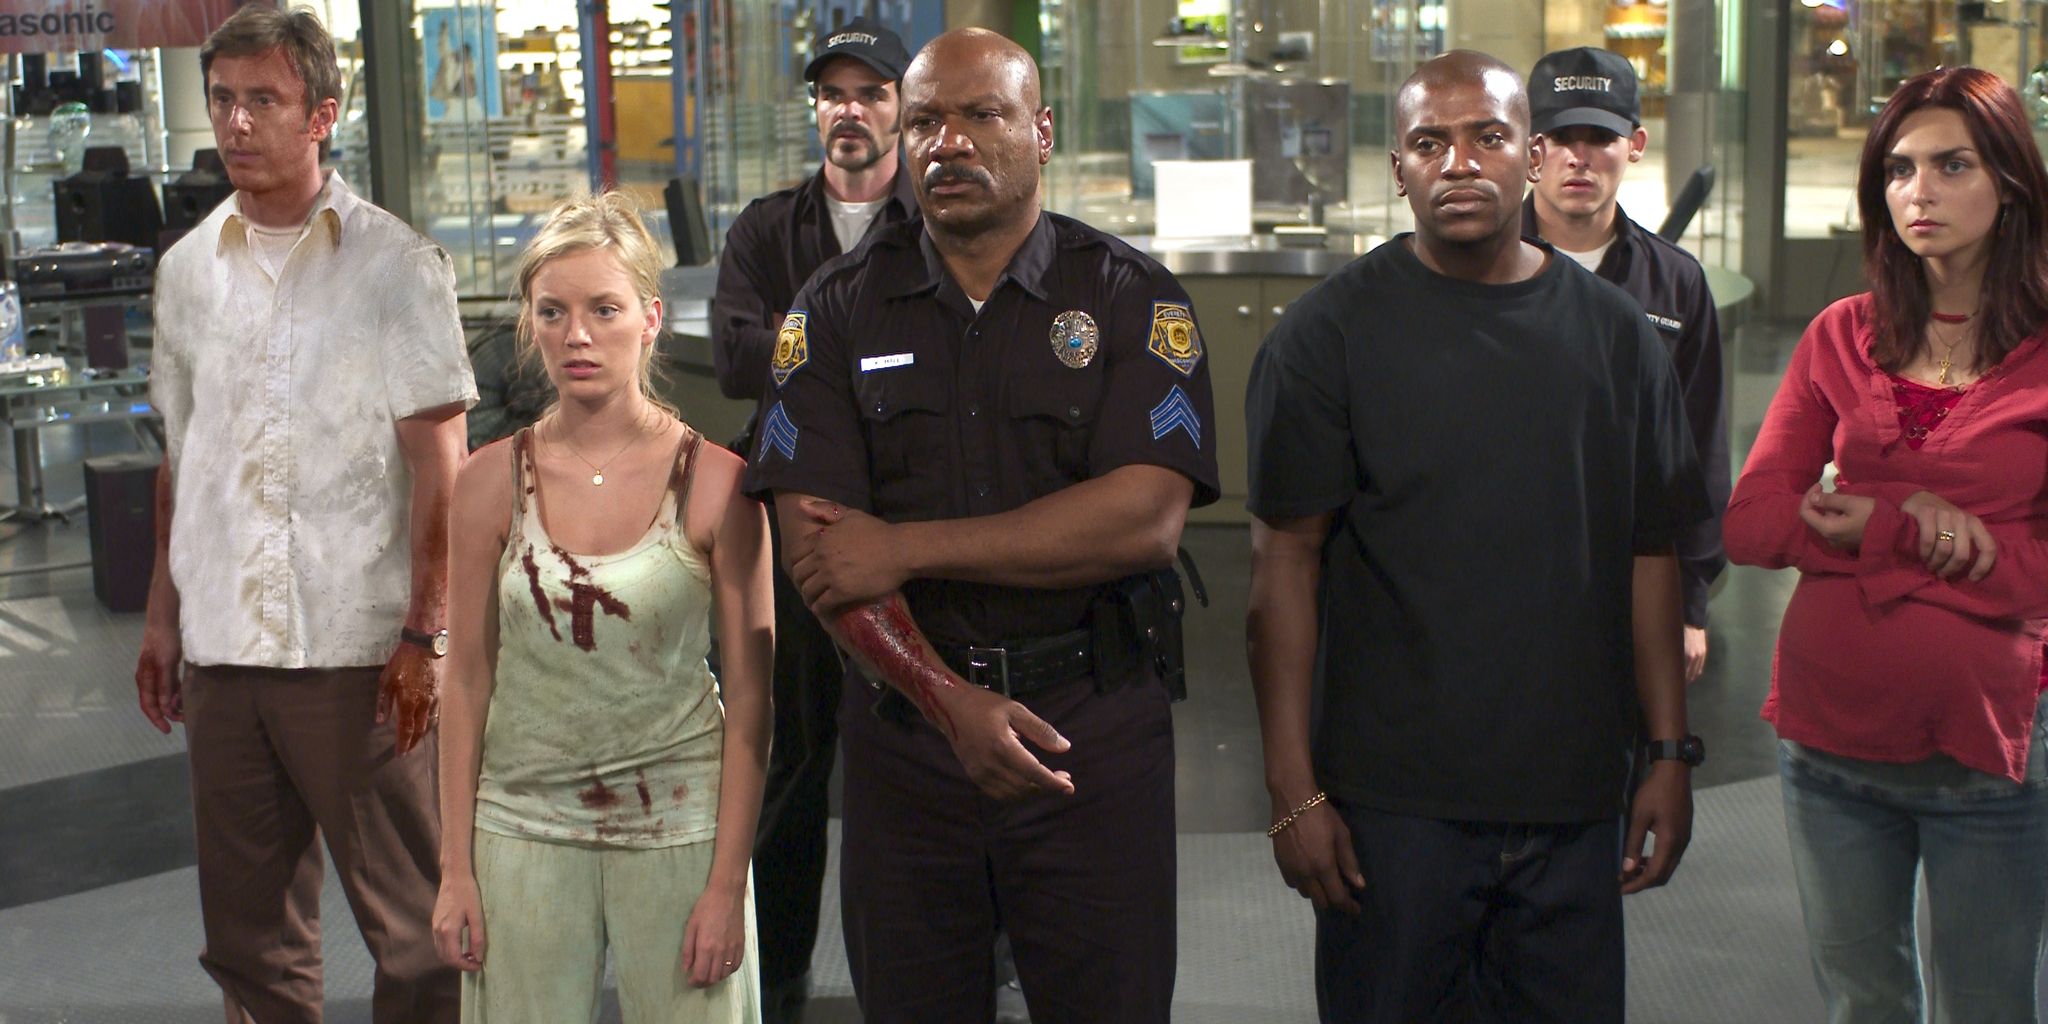 The cast of 2004's Dawn of the Dead